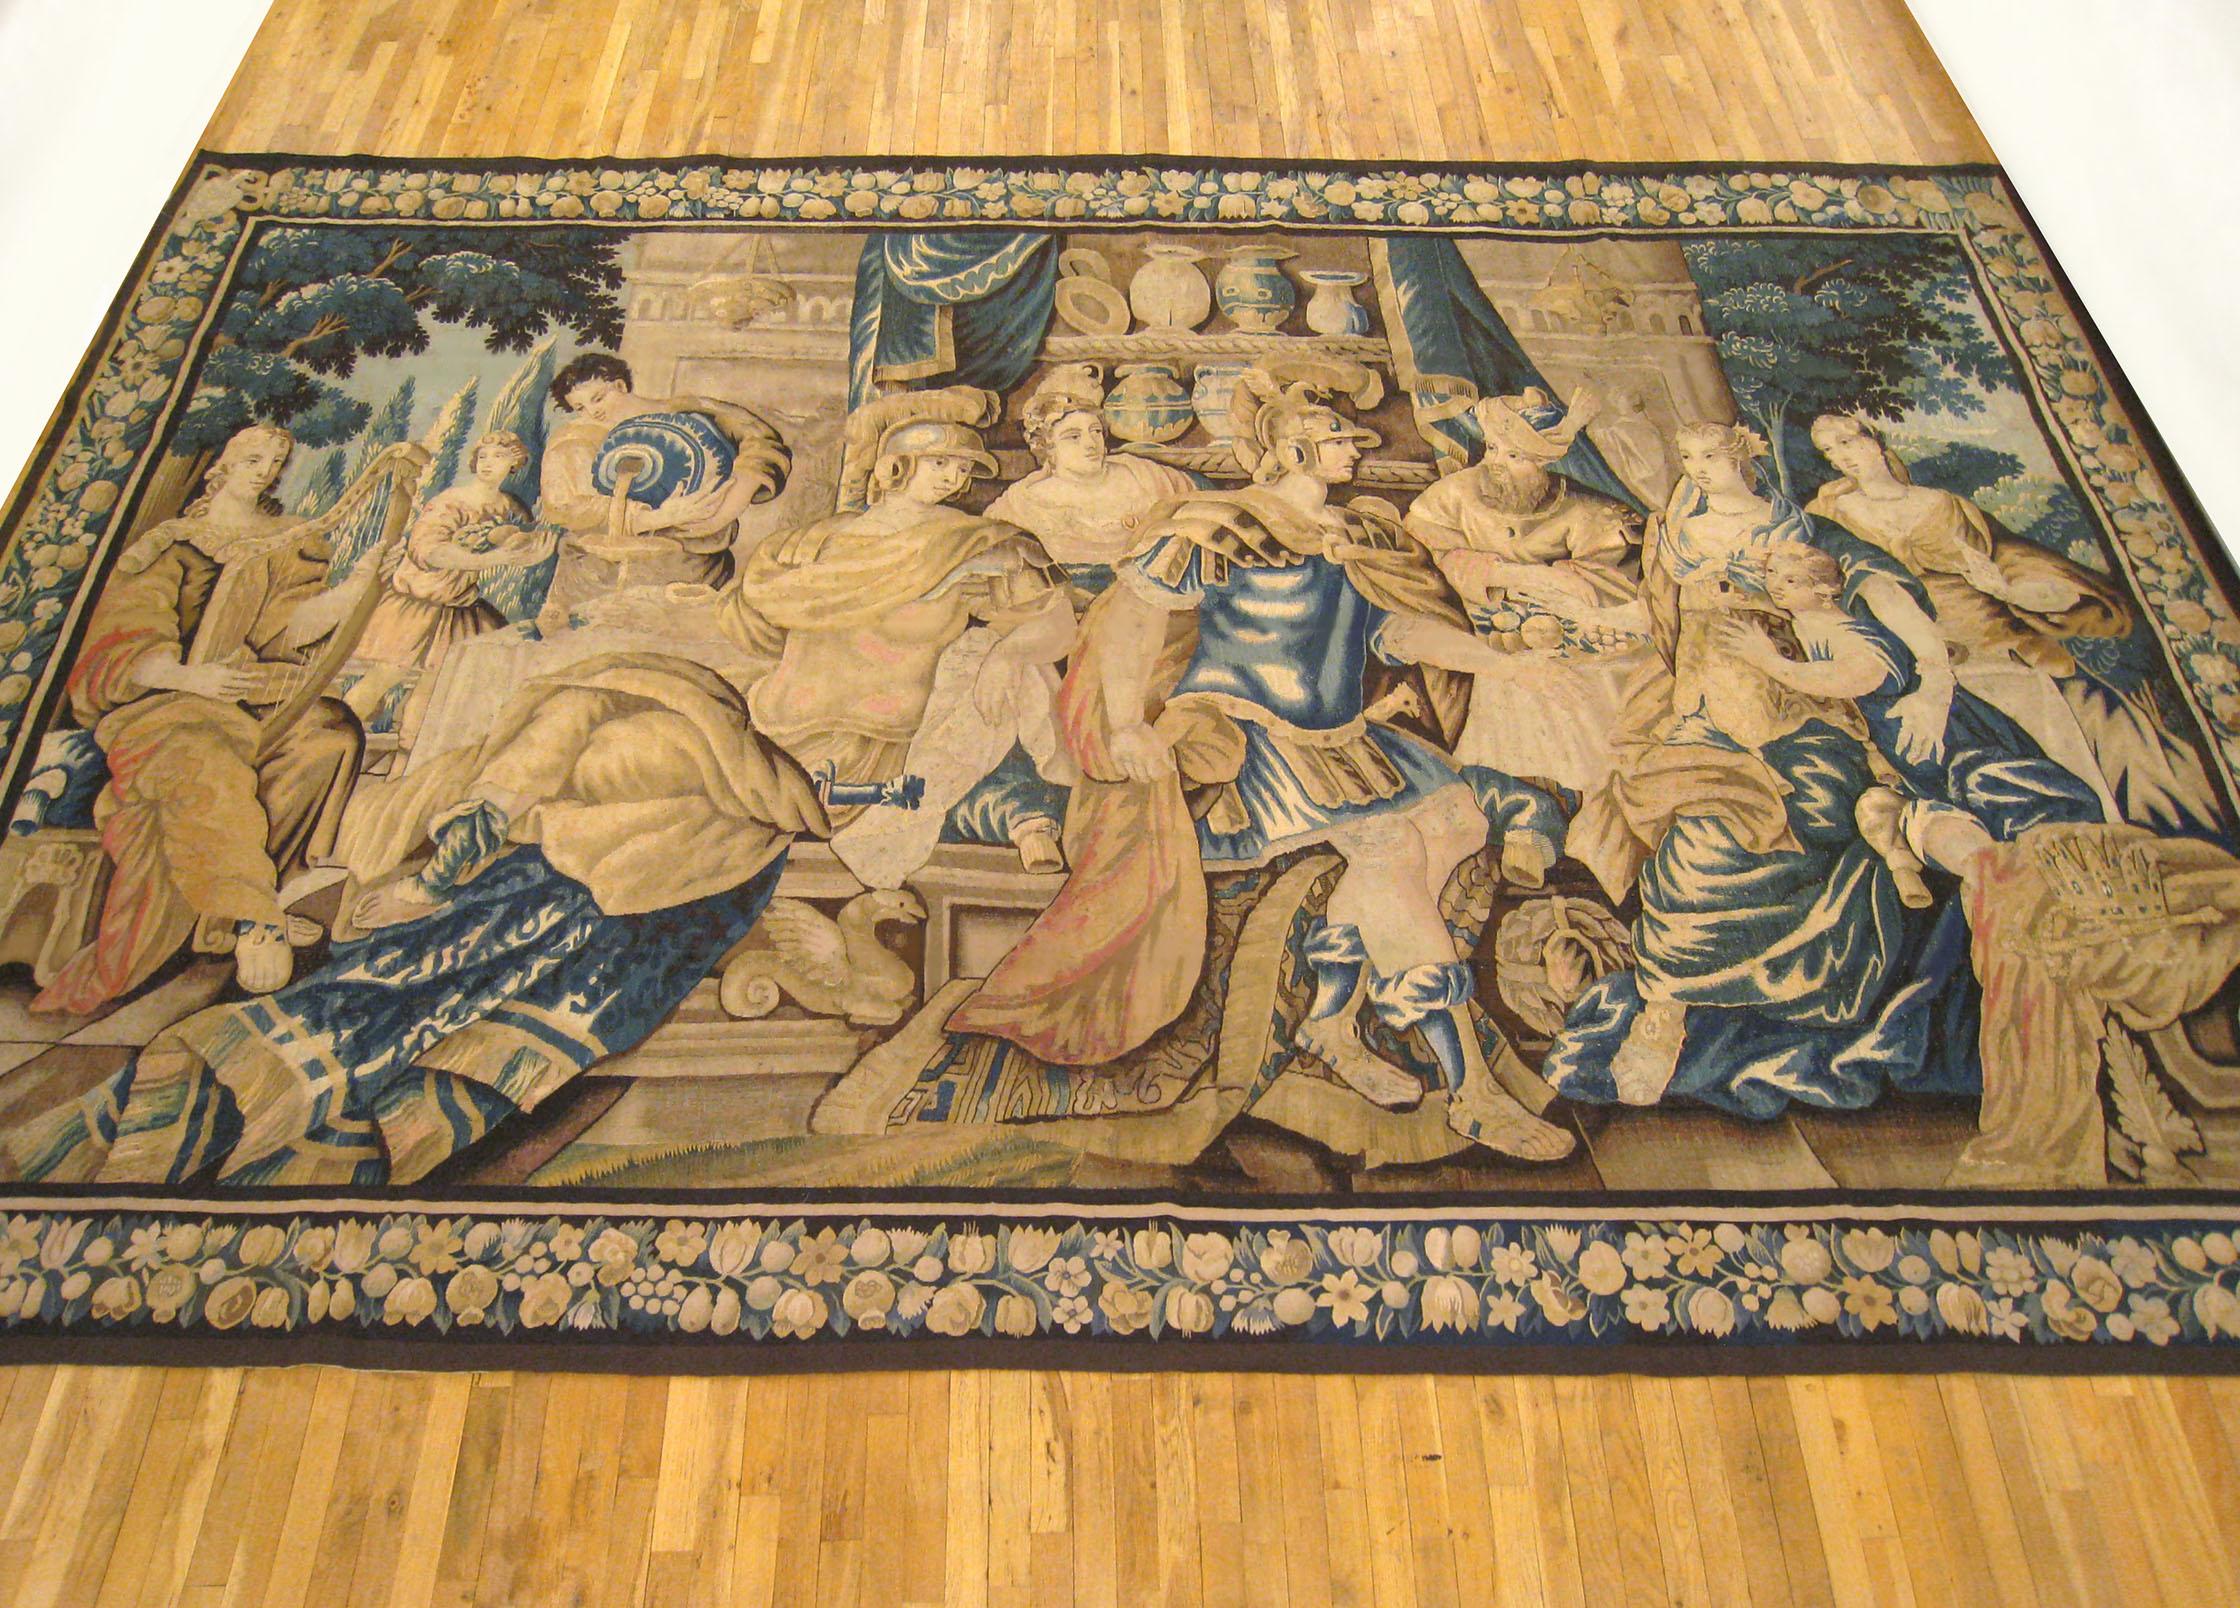 A French Aubusson historical tapestry from the late 17th century, depicting Aeneas relating his adventures to Dido, from 'The Story of Dido and Aeneas' series after Virgil’s 'The Aeneid'. This set was woven from cartoons created by the French